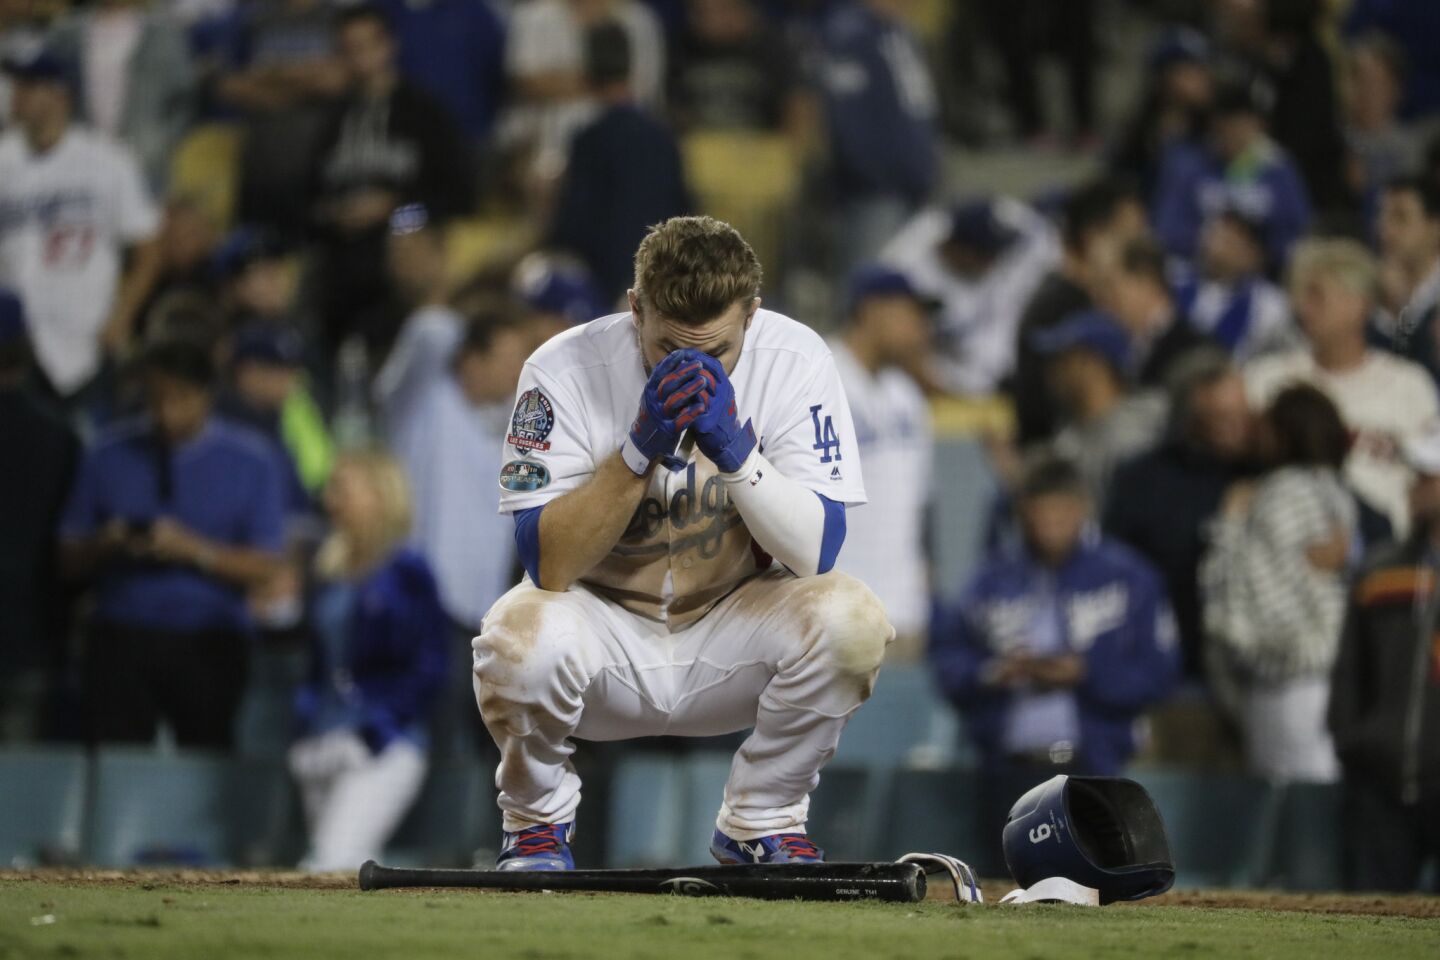 Dodgers Brian Dozier is upset after striking out in the bottom of the 10th inning.